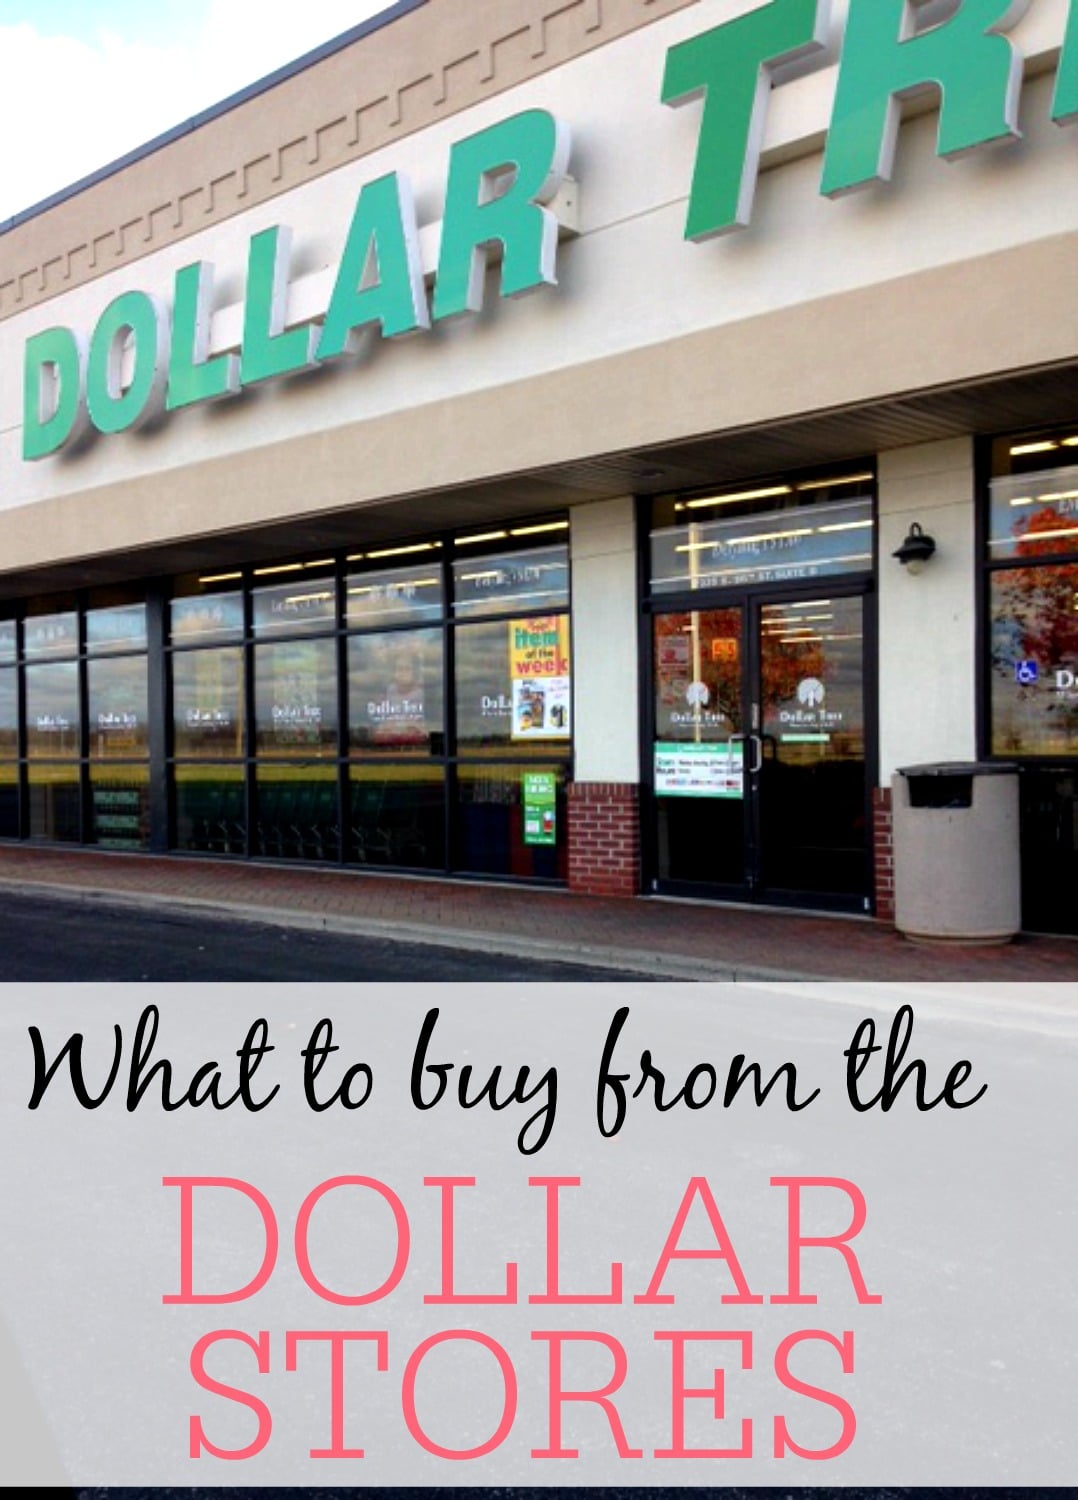 What to buy from the dollar stores